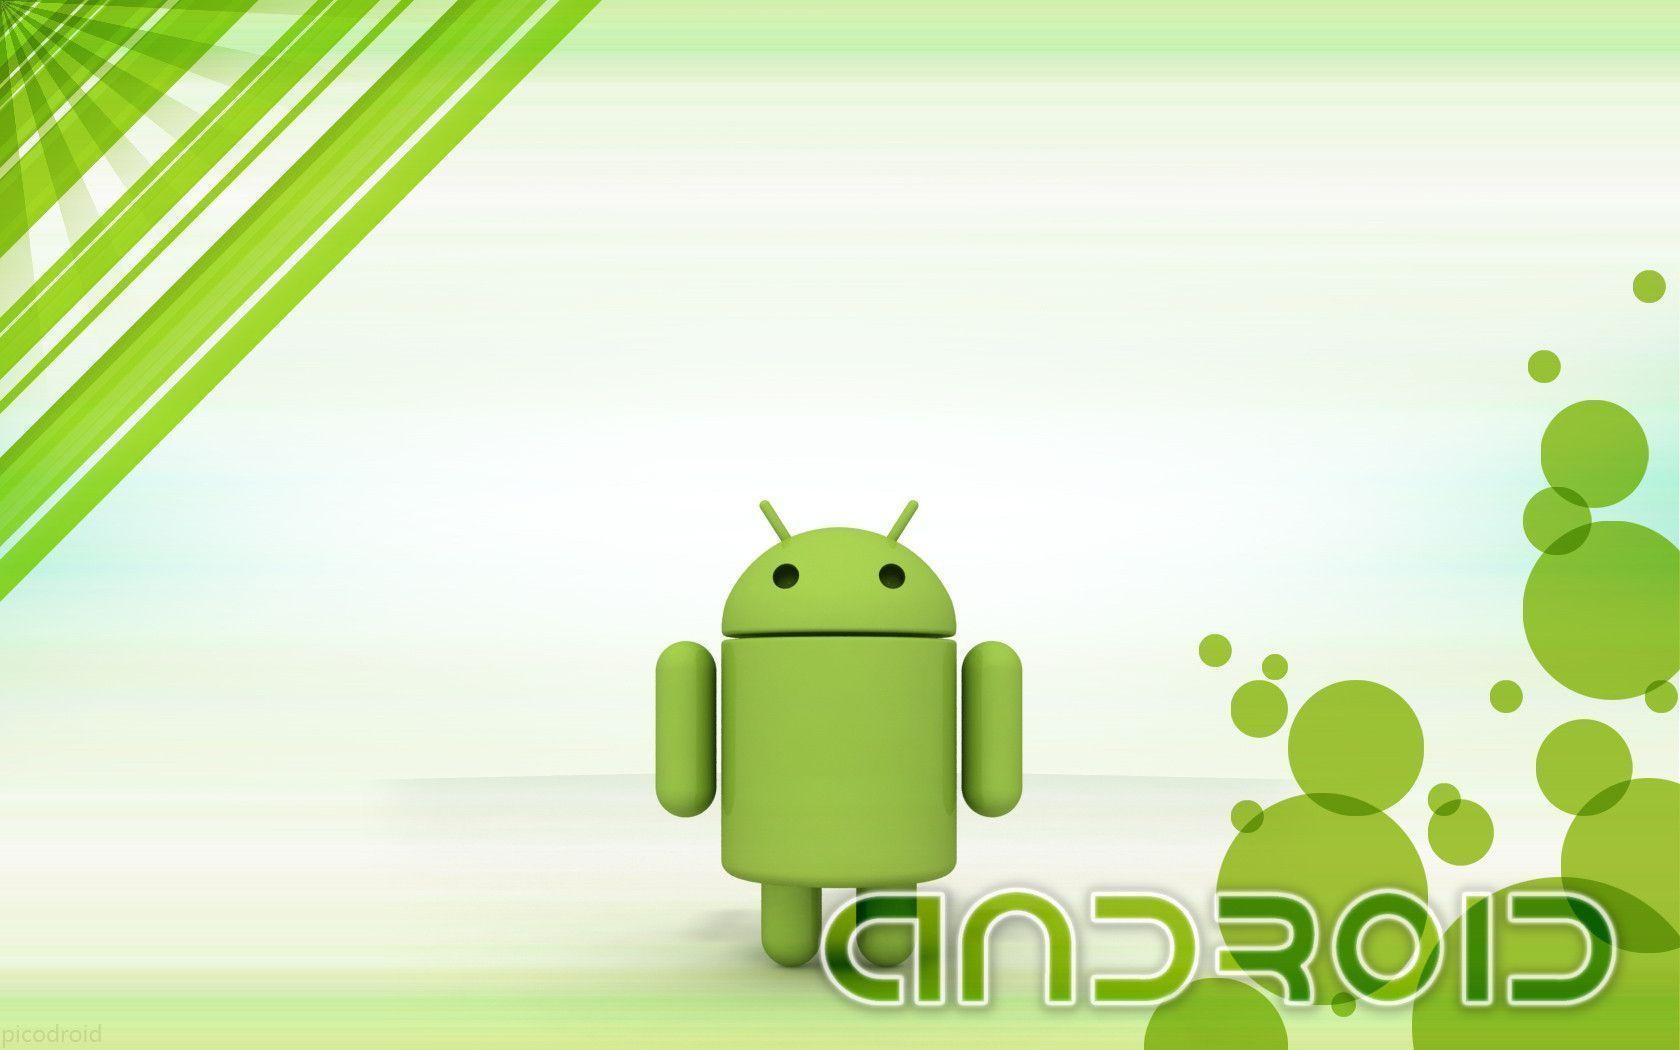 Awesome Android Wallpaper. TutorArt. Graphic Design